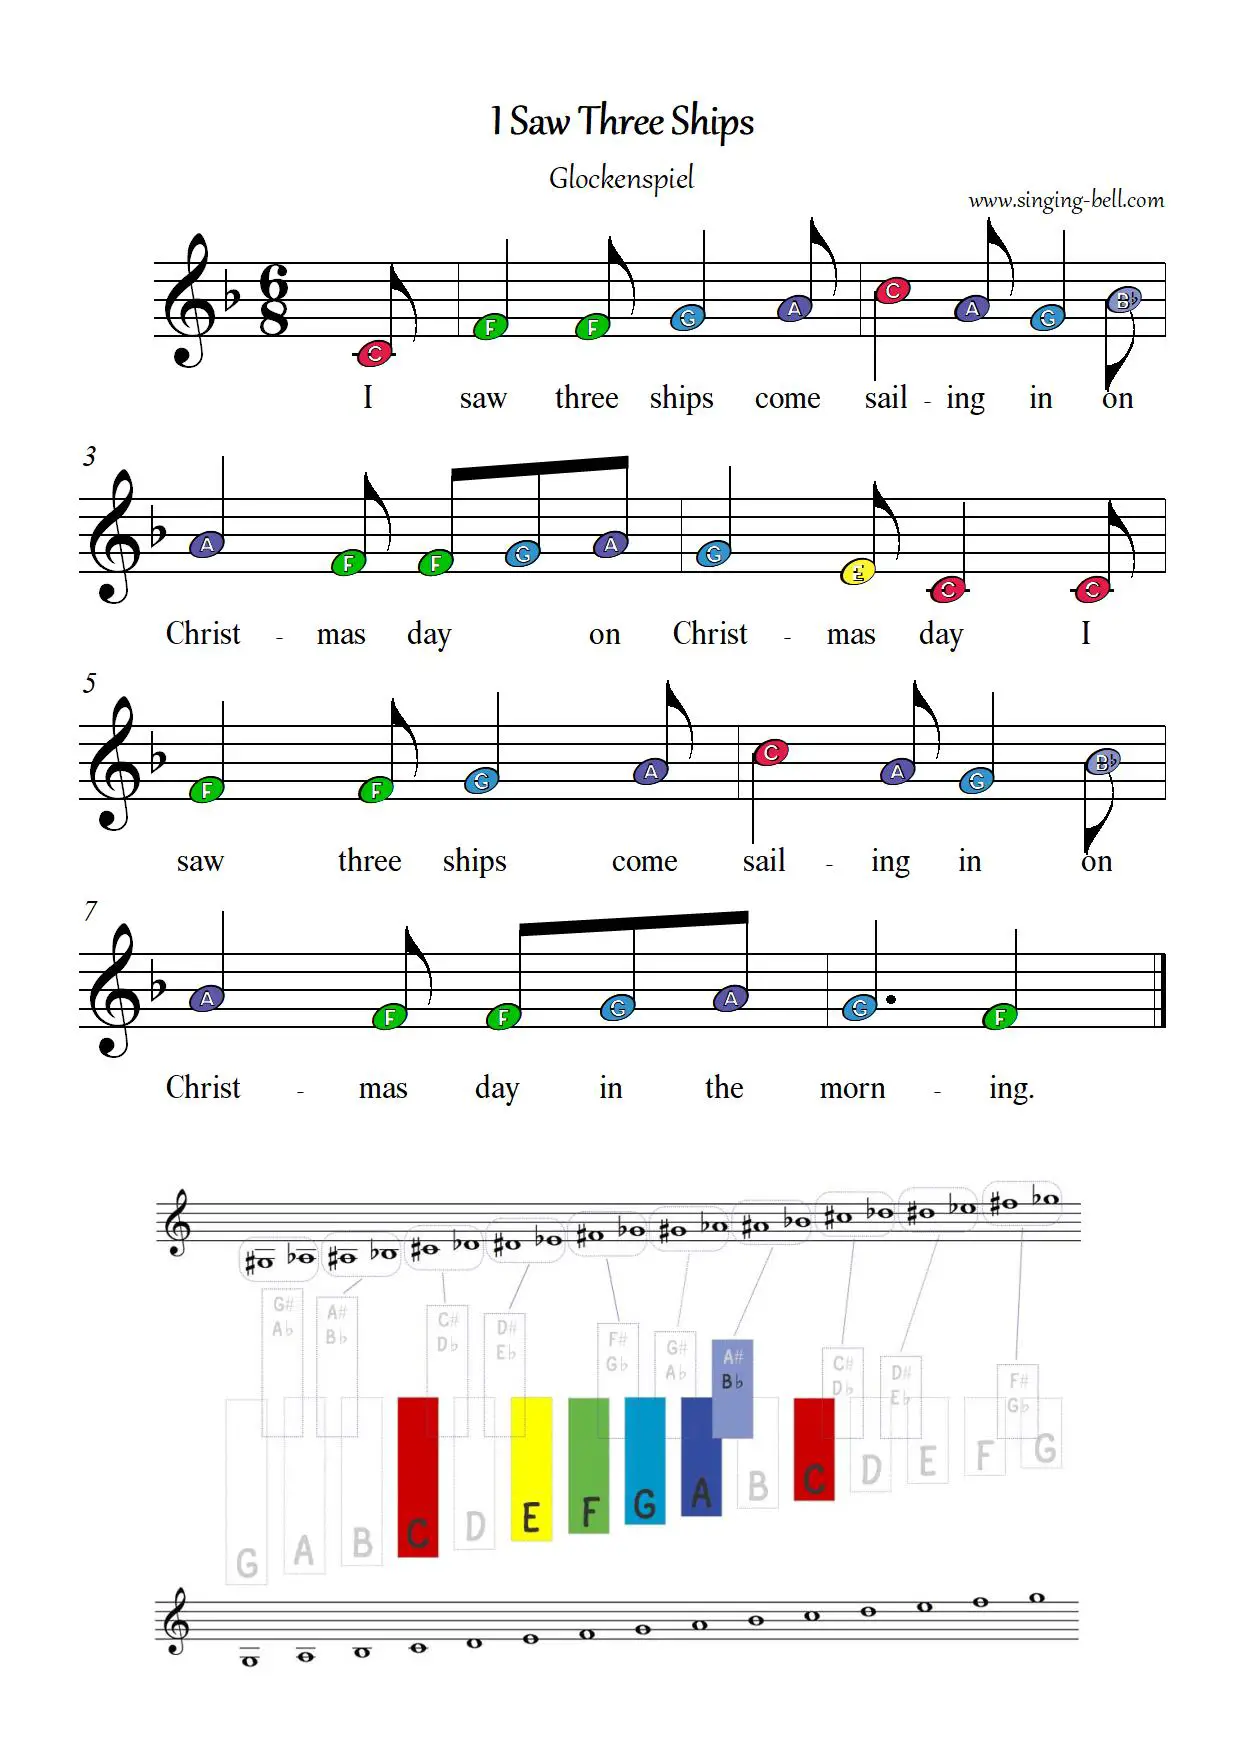 I saw three ships free xylophone glockenspiel sheet music color notes chart pdf